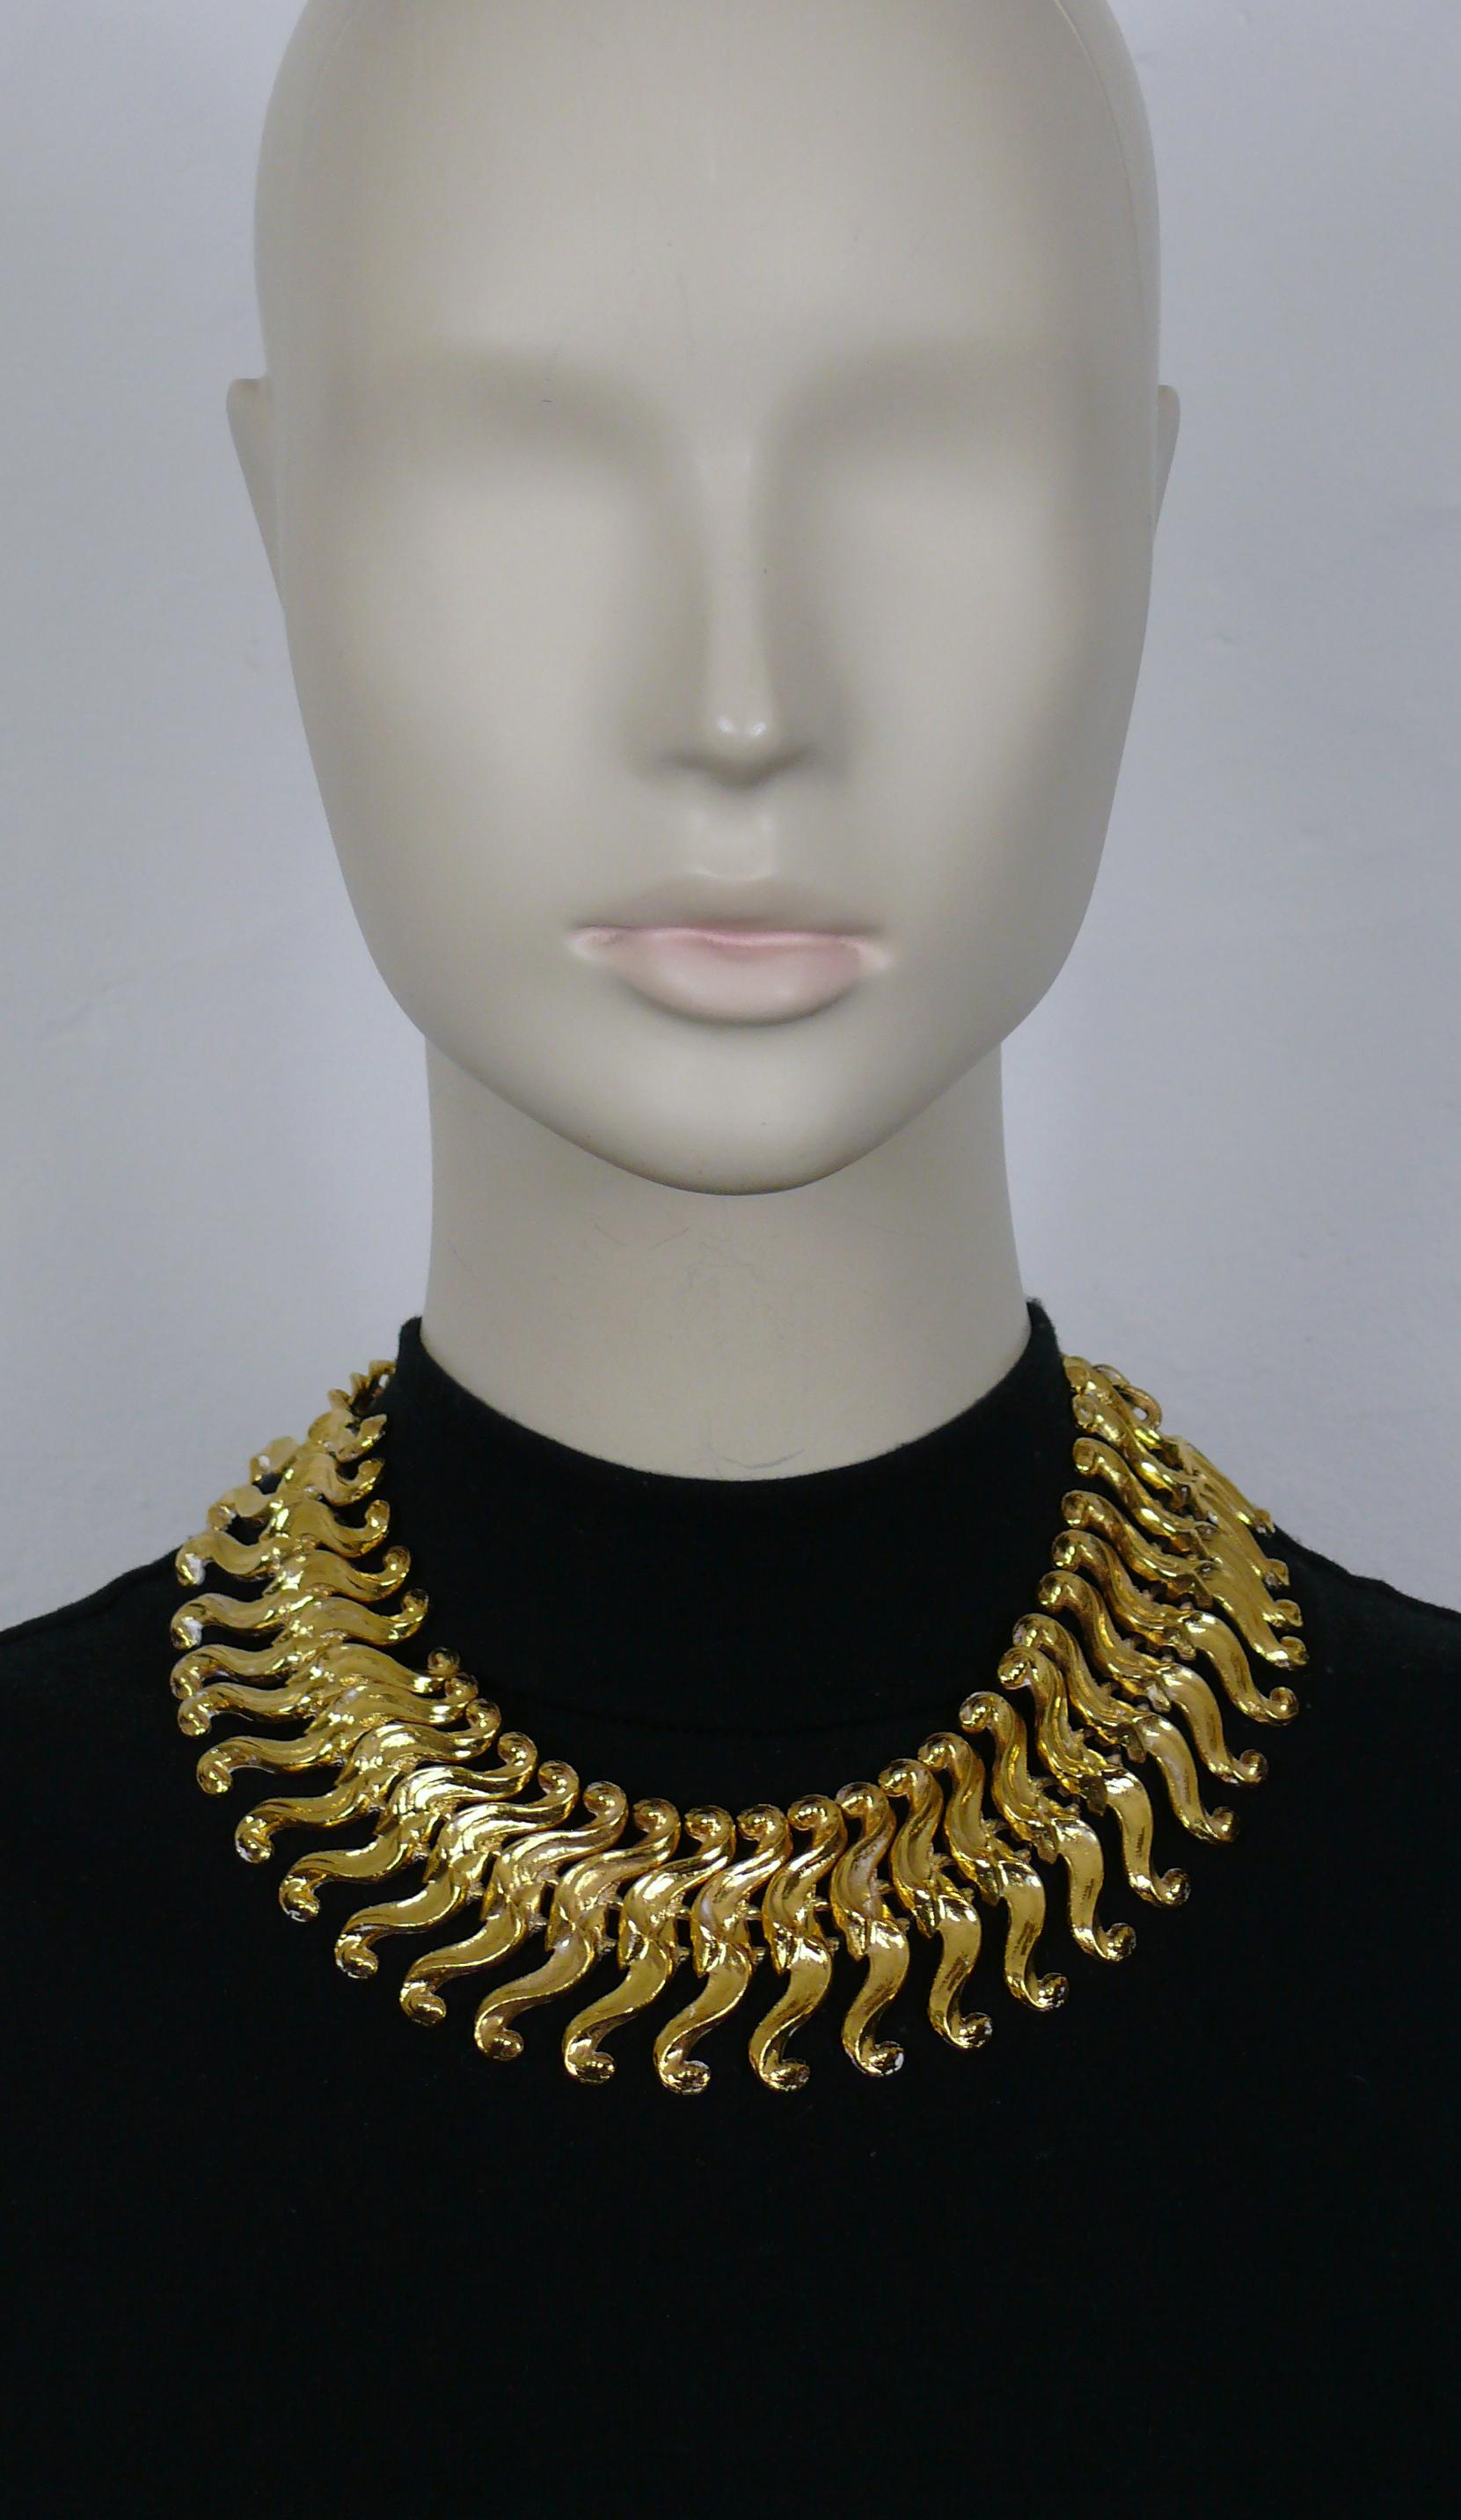 L'OR DU SOIR vintage gold tone necklace featuring articulated scroll links.

Toggle and loop closure.

Embossed L'OR DU SOIR Paris.

Indicative measurements : length approx. 47 cm (18.50 inches) / width approx. 4.6 cm (1.81 inches).

Material : Gold